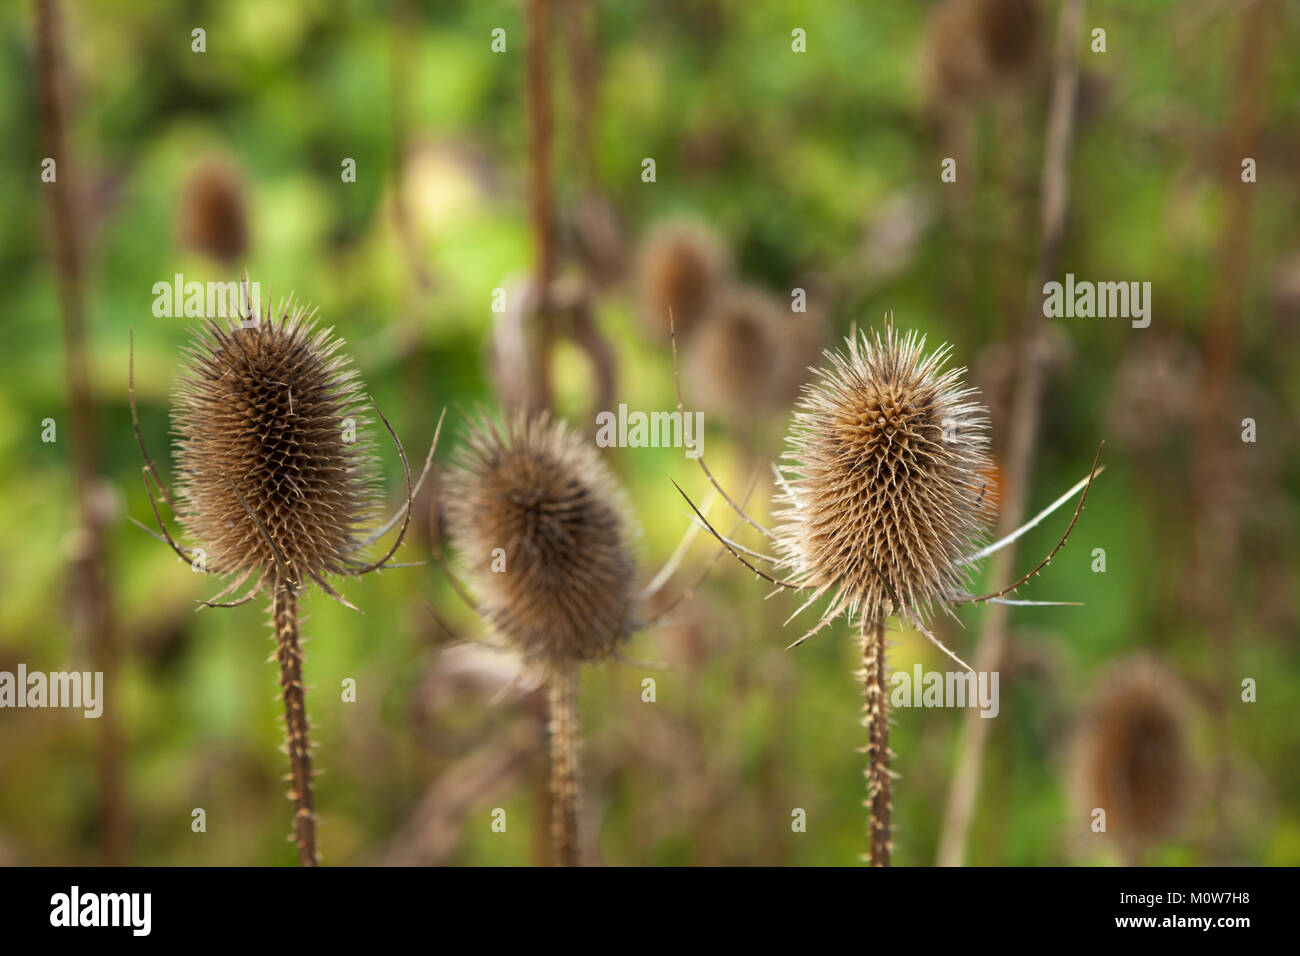 The prickly seed heads of teasels in late summer provide a food source for birds, growing in the vegetable garden of Rousham House, Oxfordshire, UK Stock Photo